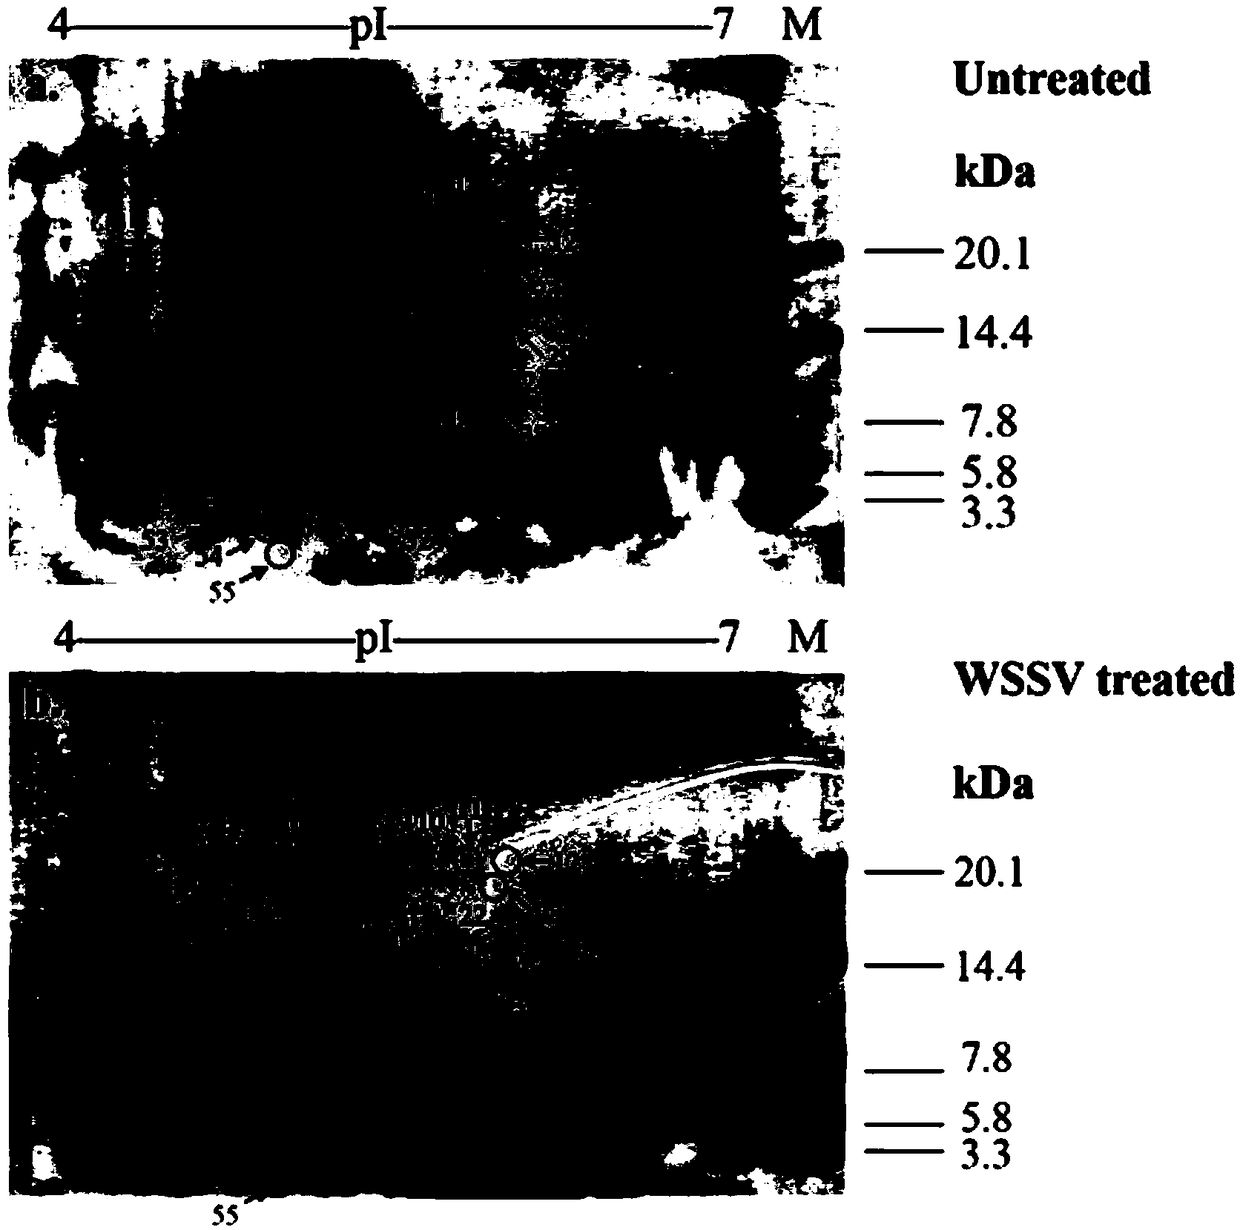 Anti-WSSV (White Spot Syndrome Virus) peptide LvHcL48 derived from litopenaeus vannamei hemocyanin and application thereof